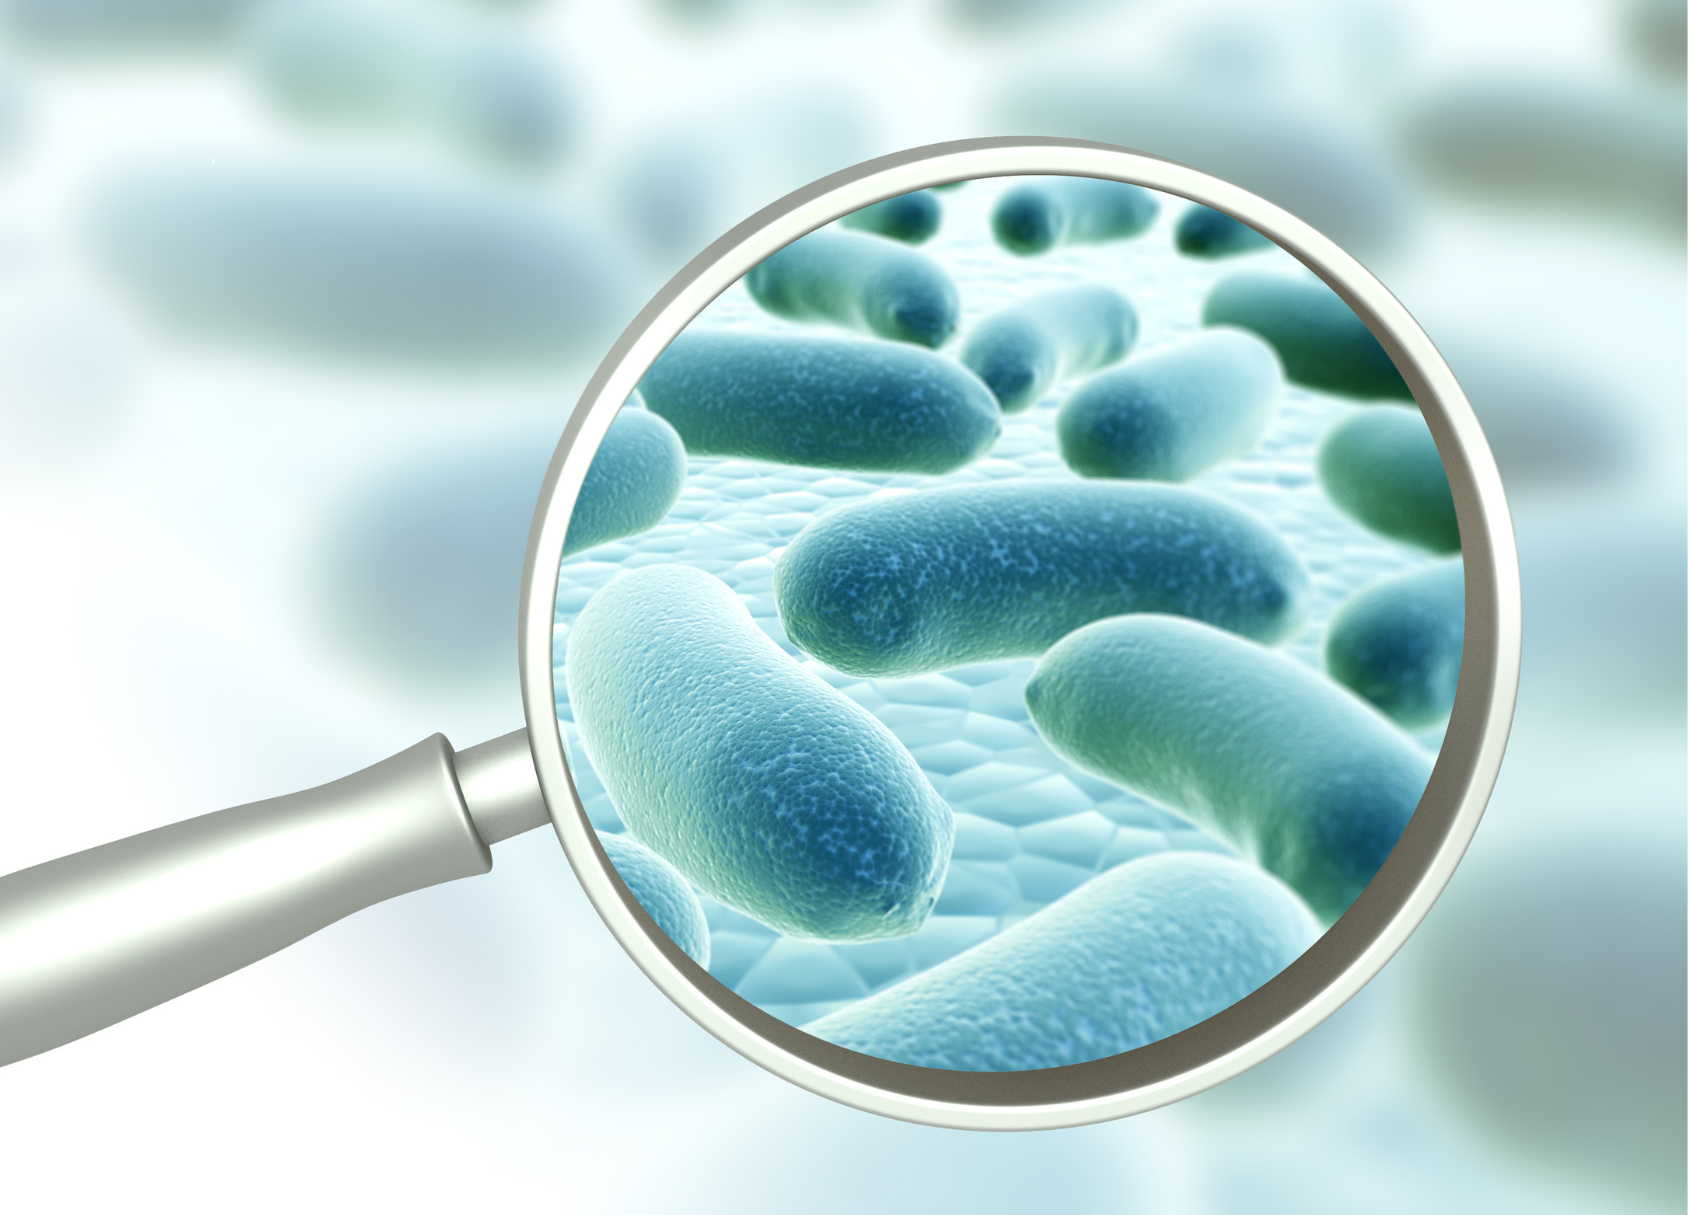 THE DIFFERENCE BETWEEN MICROBIOME AND MICROBIOTA